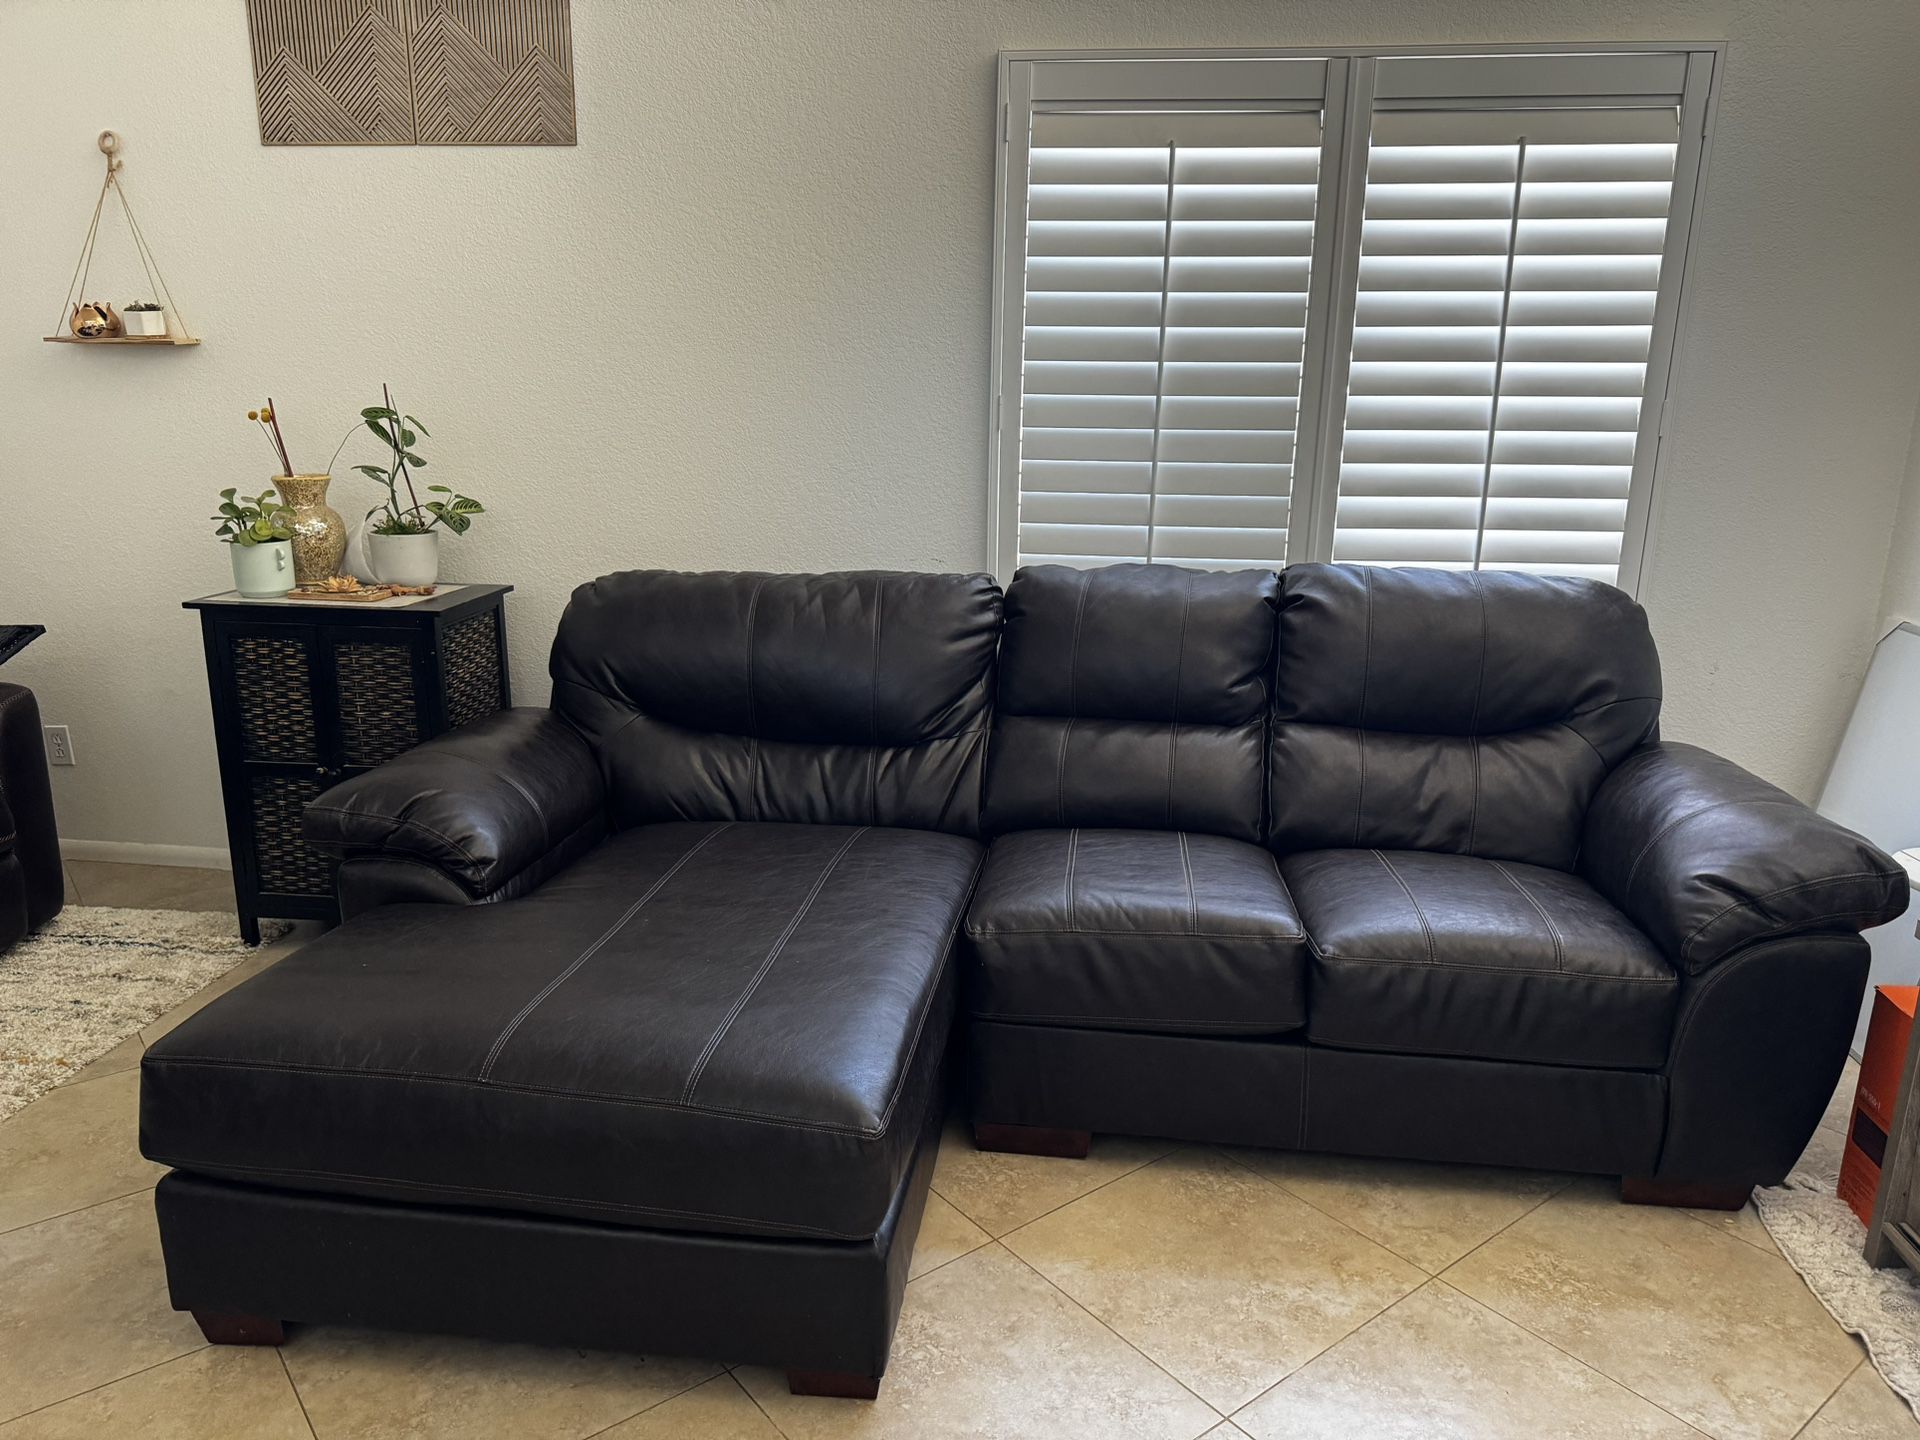 Sectional Leather Sofa For Sale  ($300)